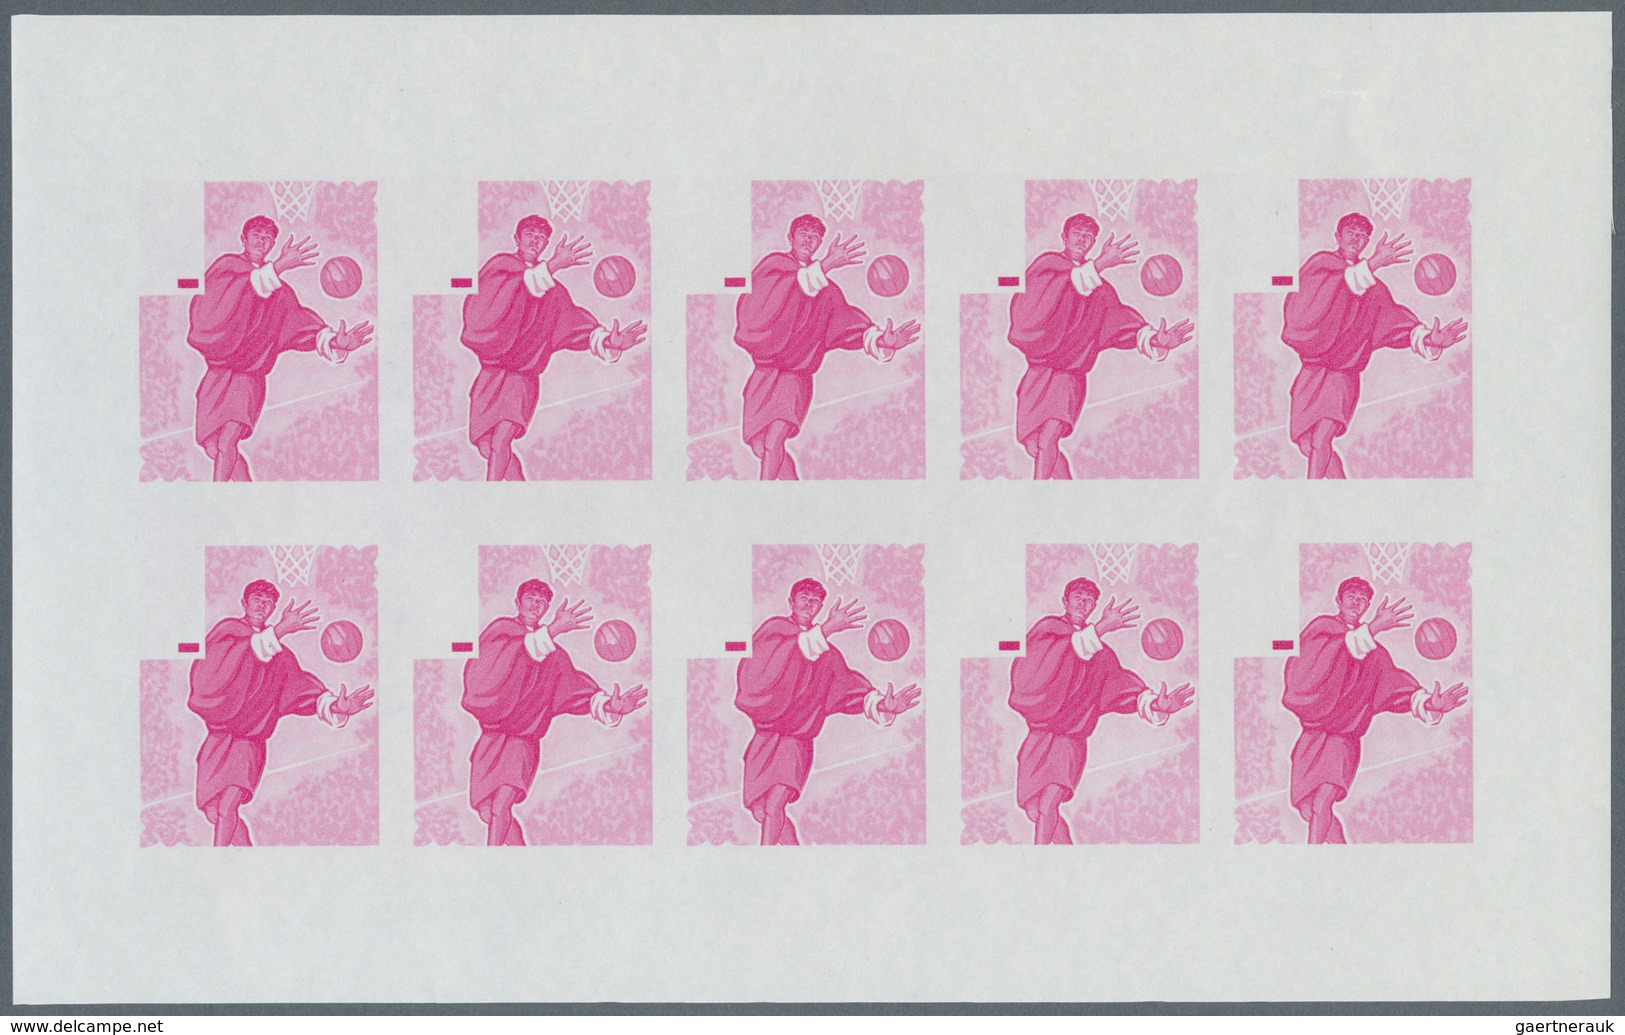 Thematik: Olympische Spiele / olympic games: 1968, Bhutan. Progressive proofs set of sheets for the